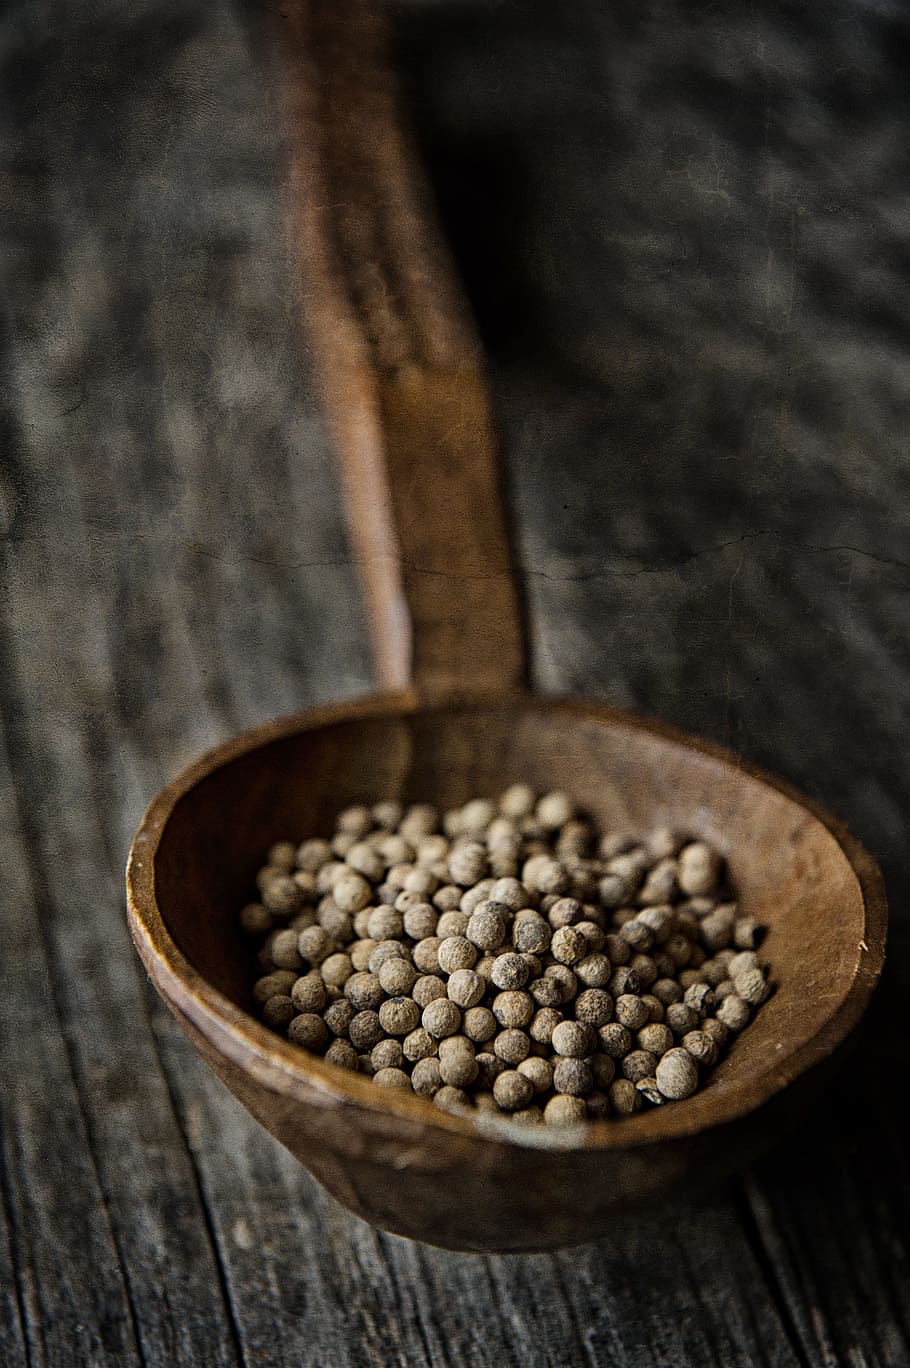 brown, cornpepper, ladle, close-up, food, peppercorns, spoon, table, wooden, food and drink